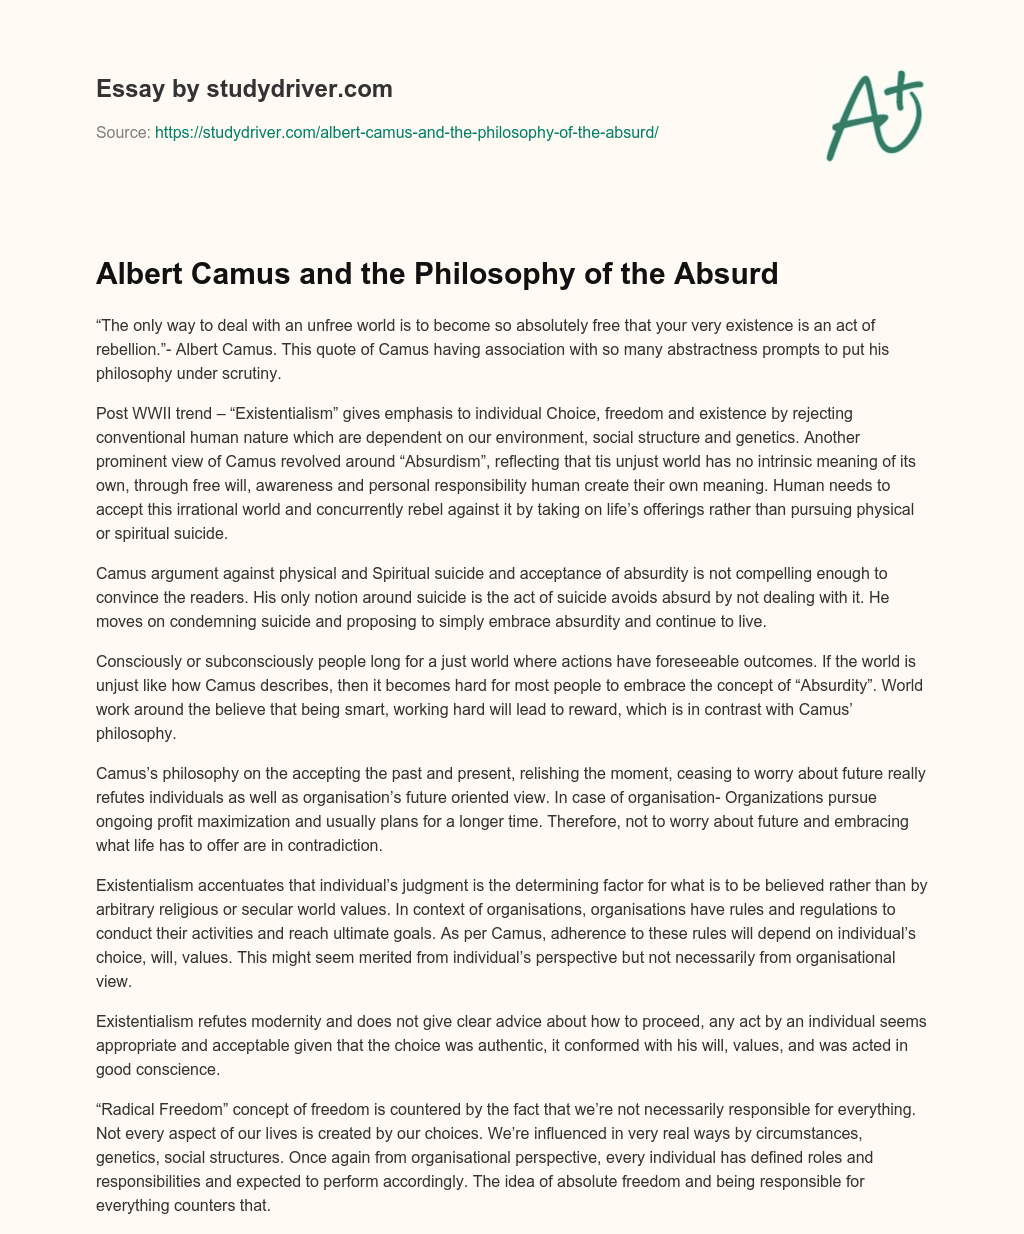 Albert Camus and the Philosophy of the Absurd essay